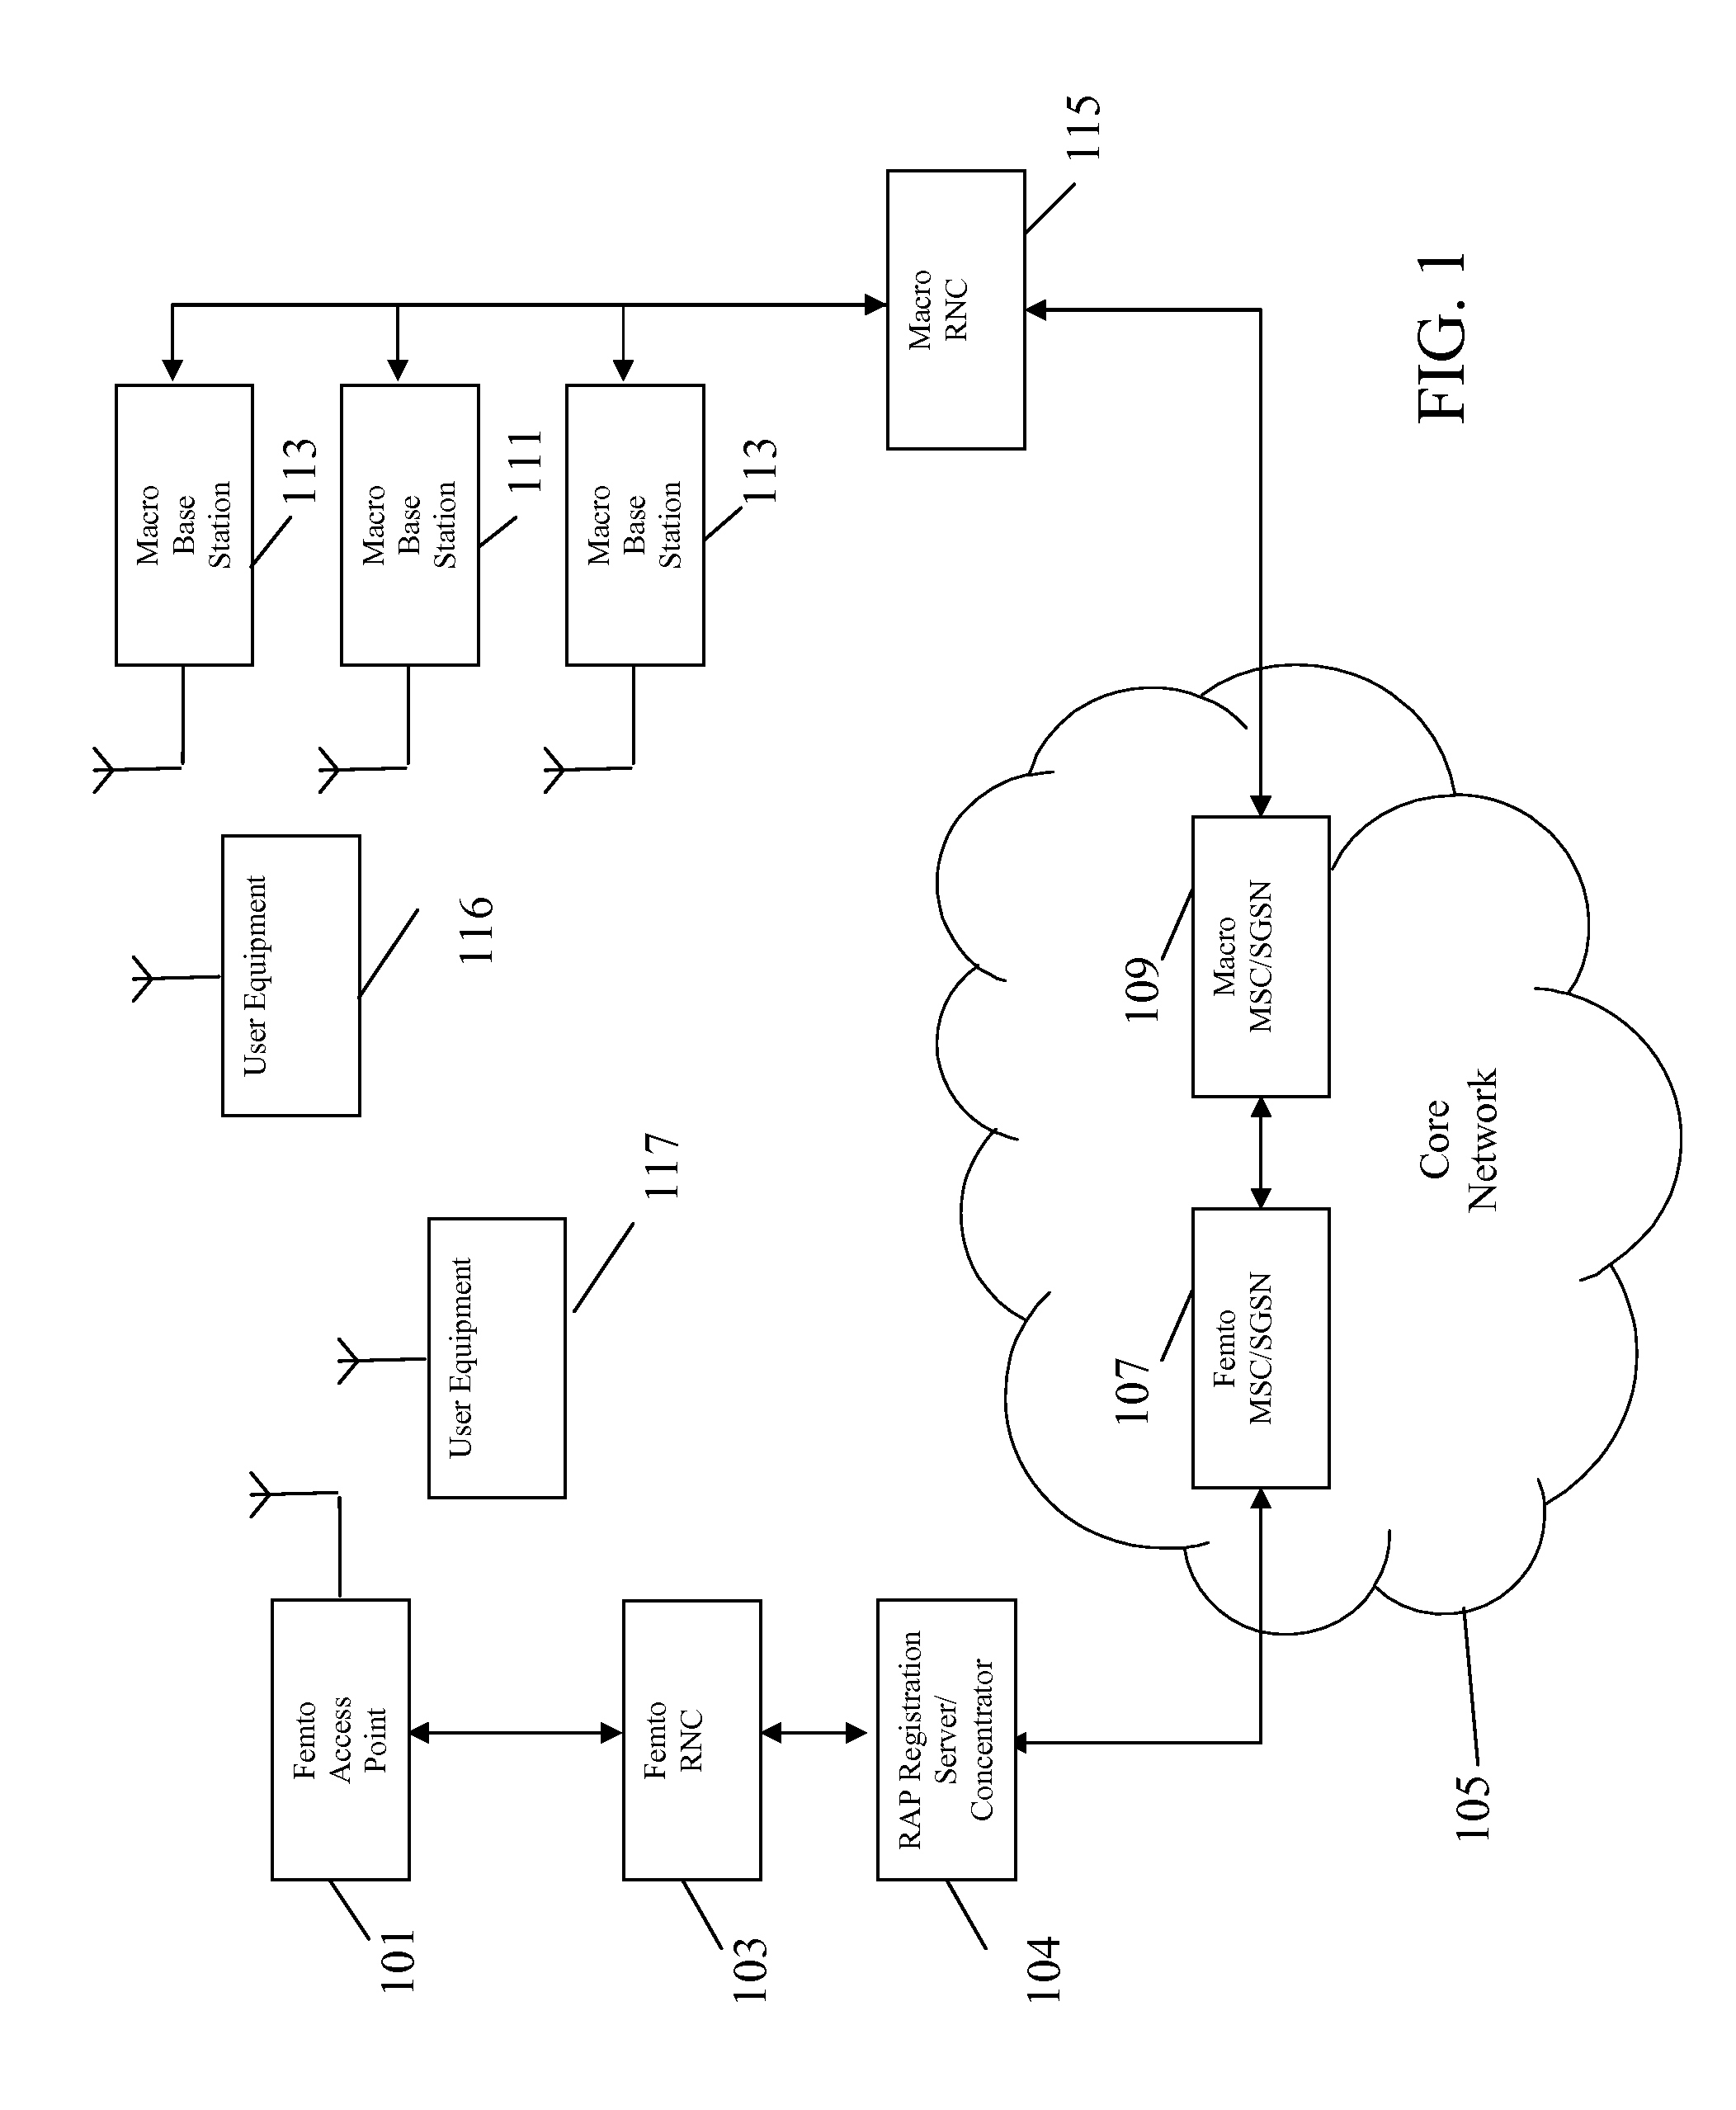 Optimizing power settings in a communication system to mitgate interference